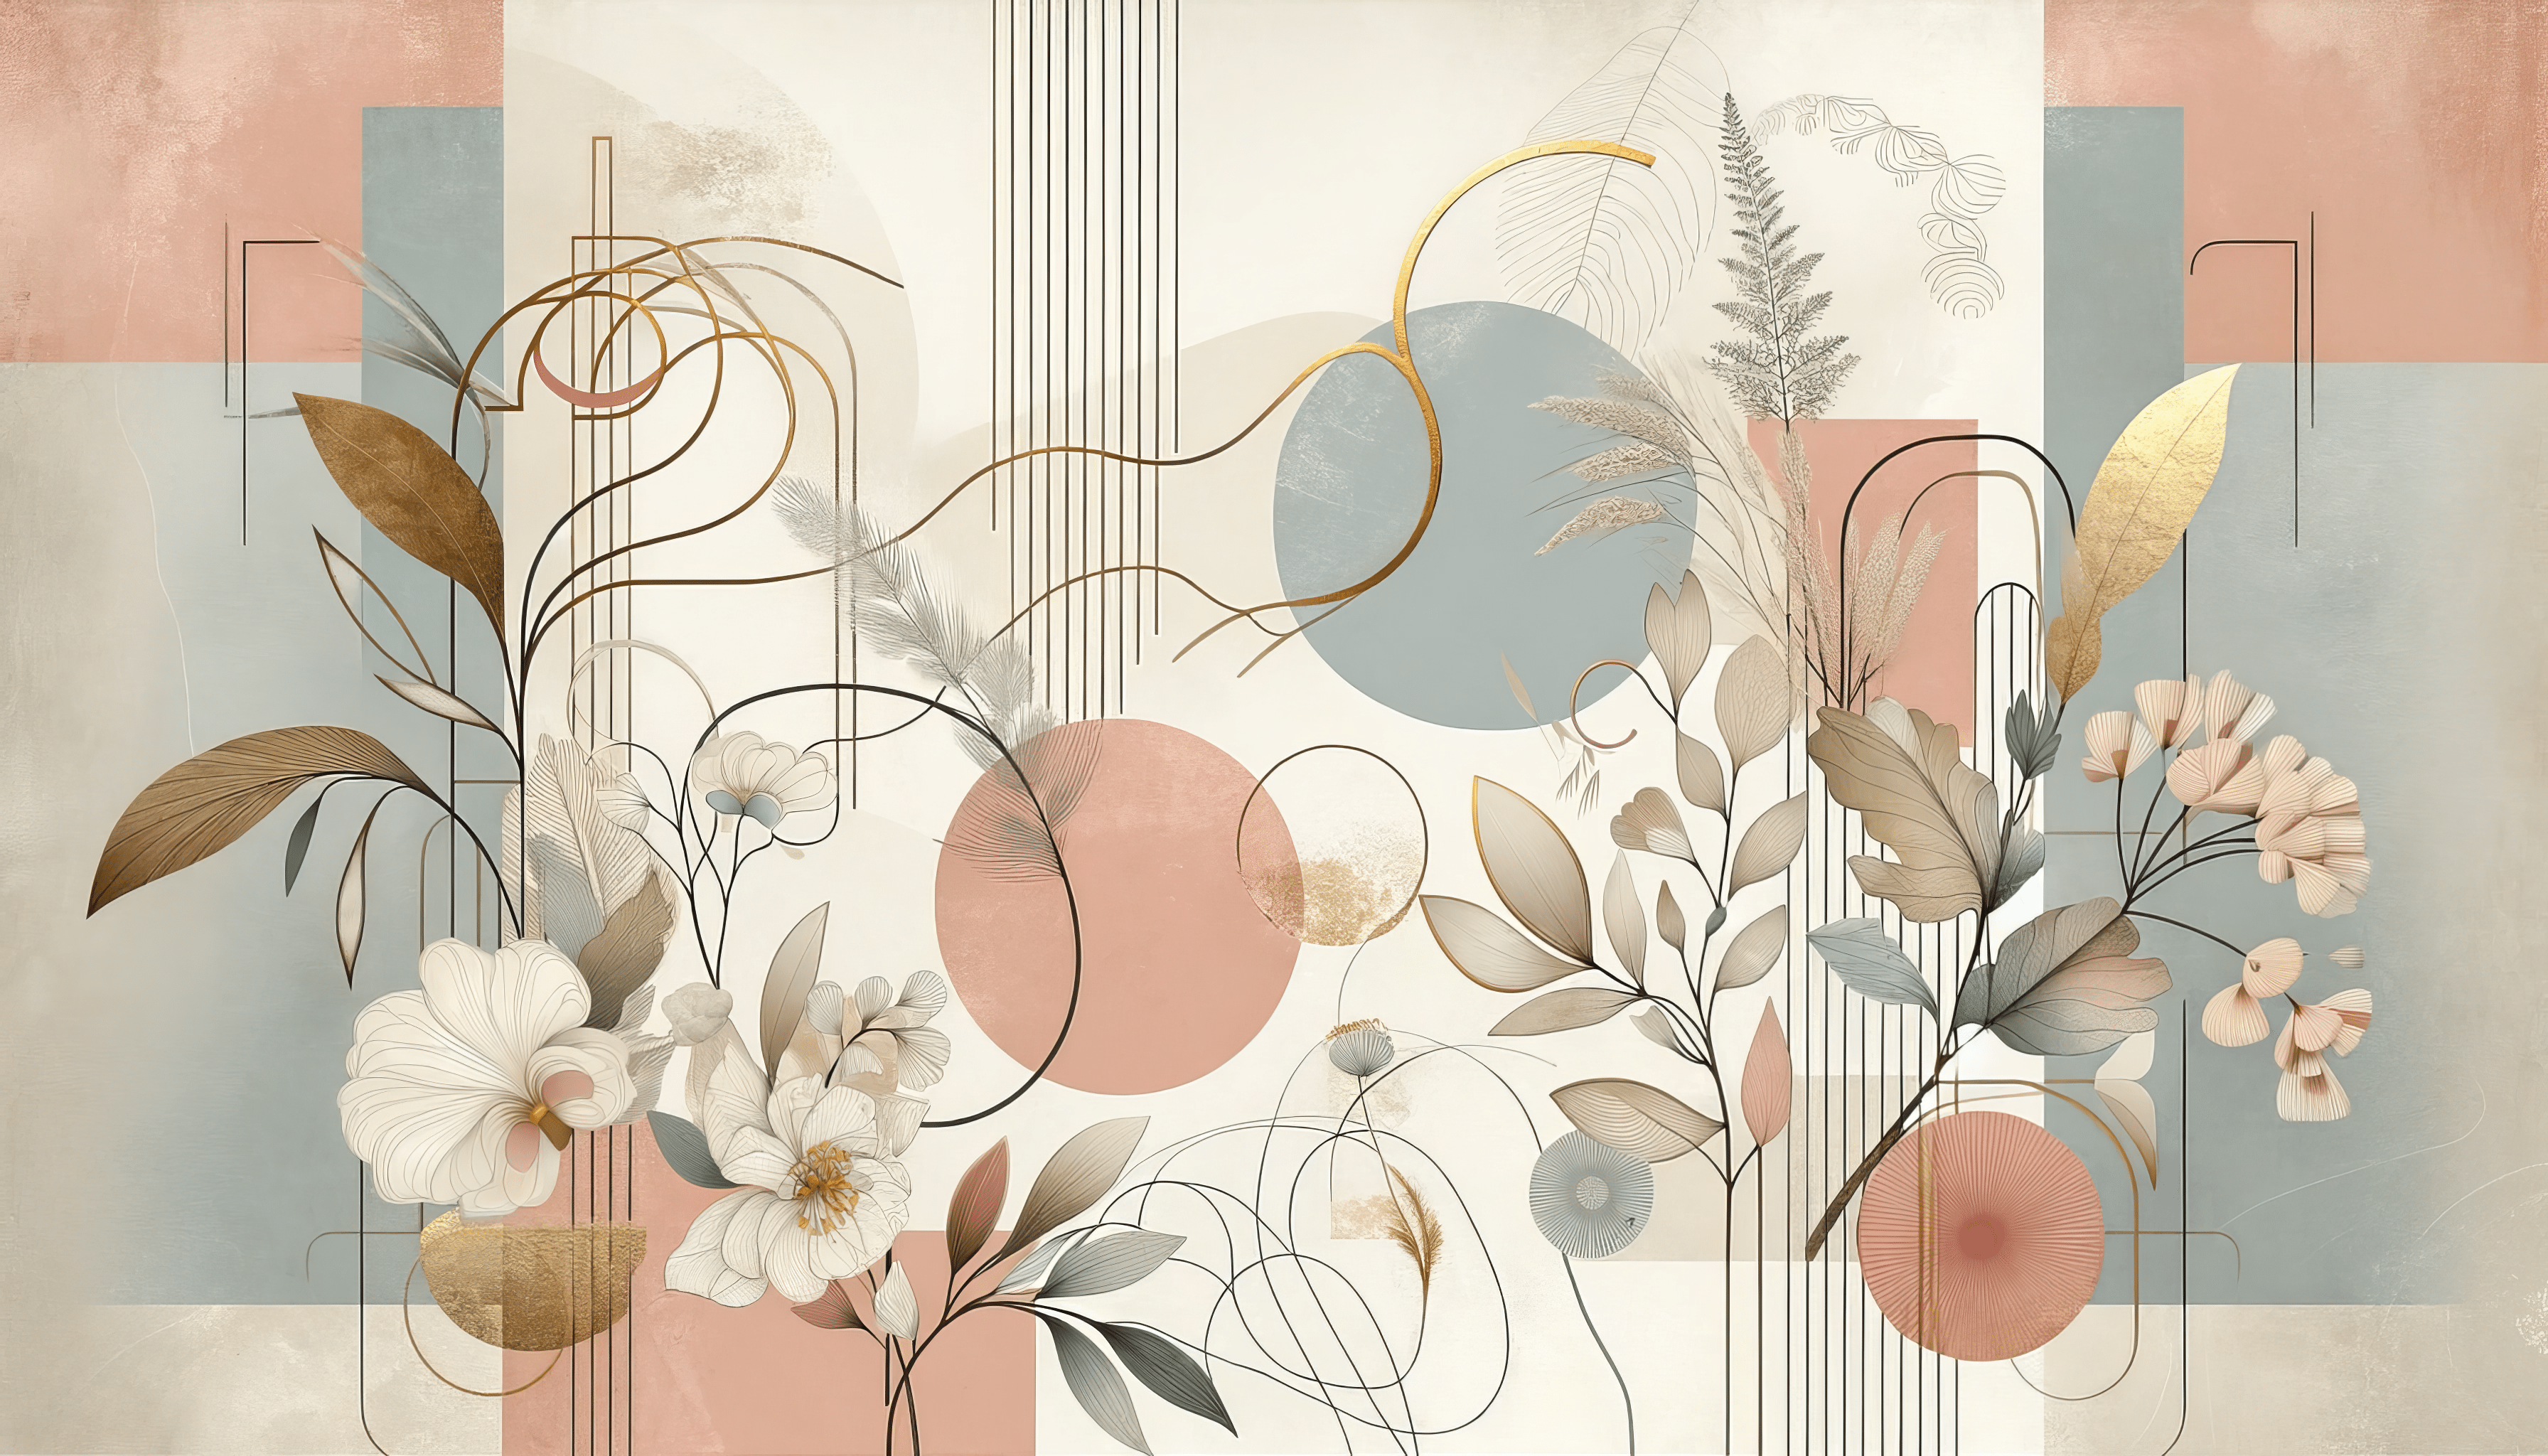 A modern wallpaper design with a mix of geometric shapes, floral patterns, and muted colors. - Desktop, Chromebook, Chinese, geometry